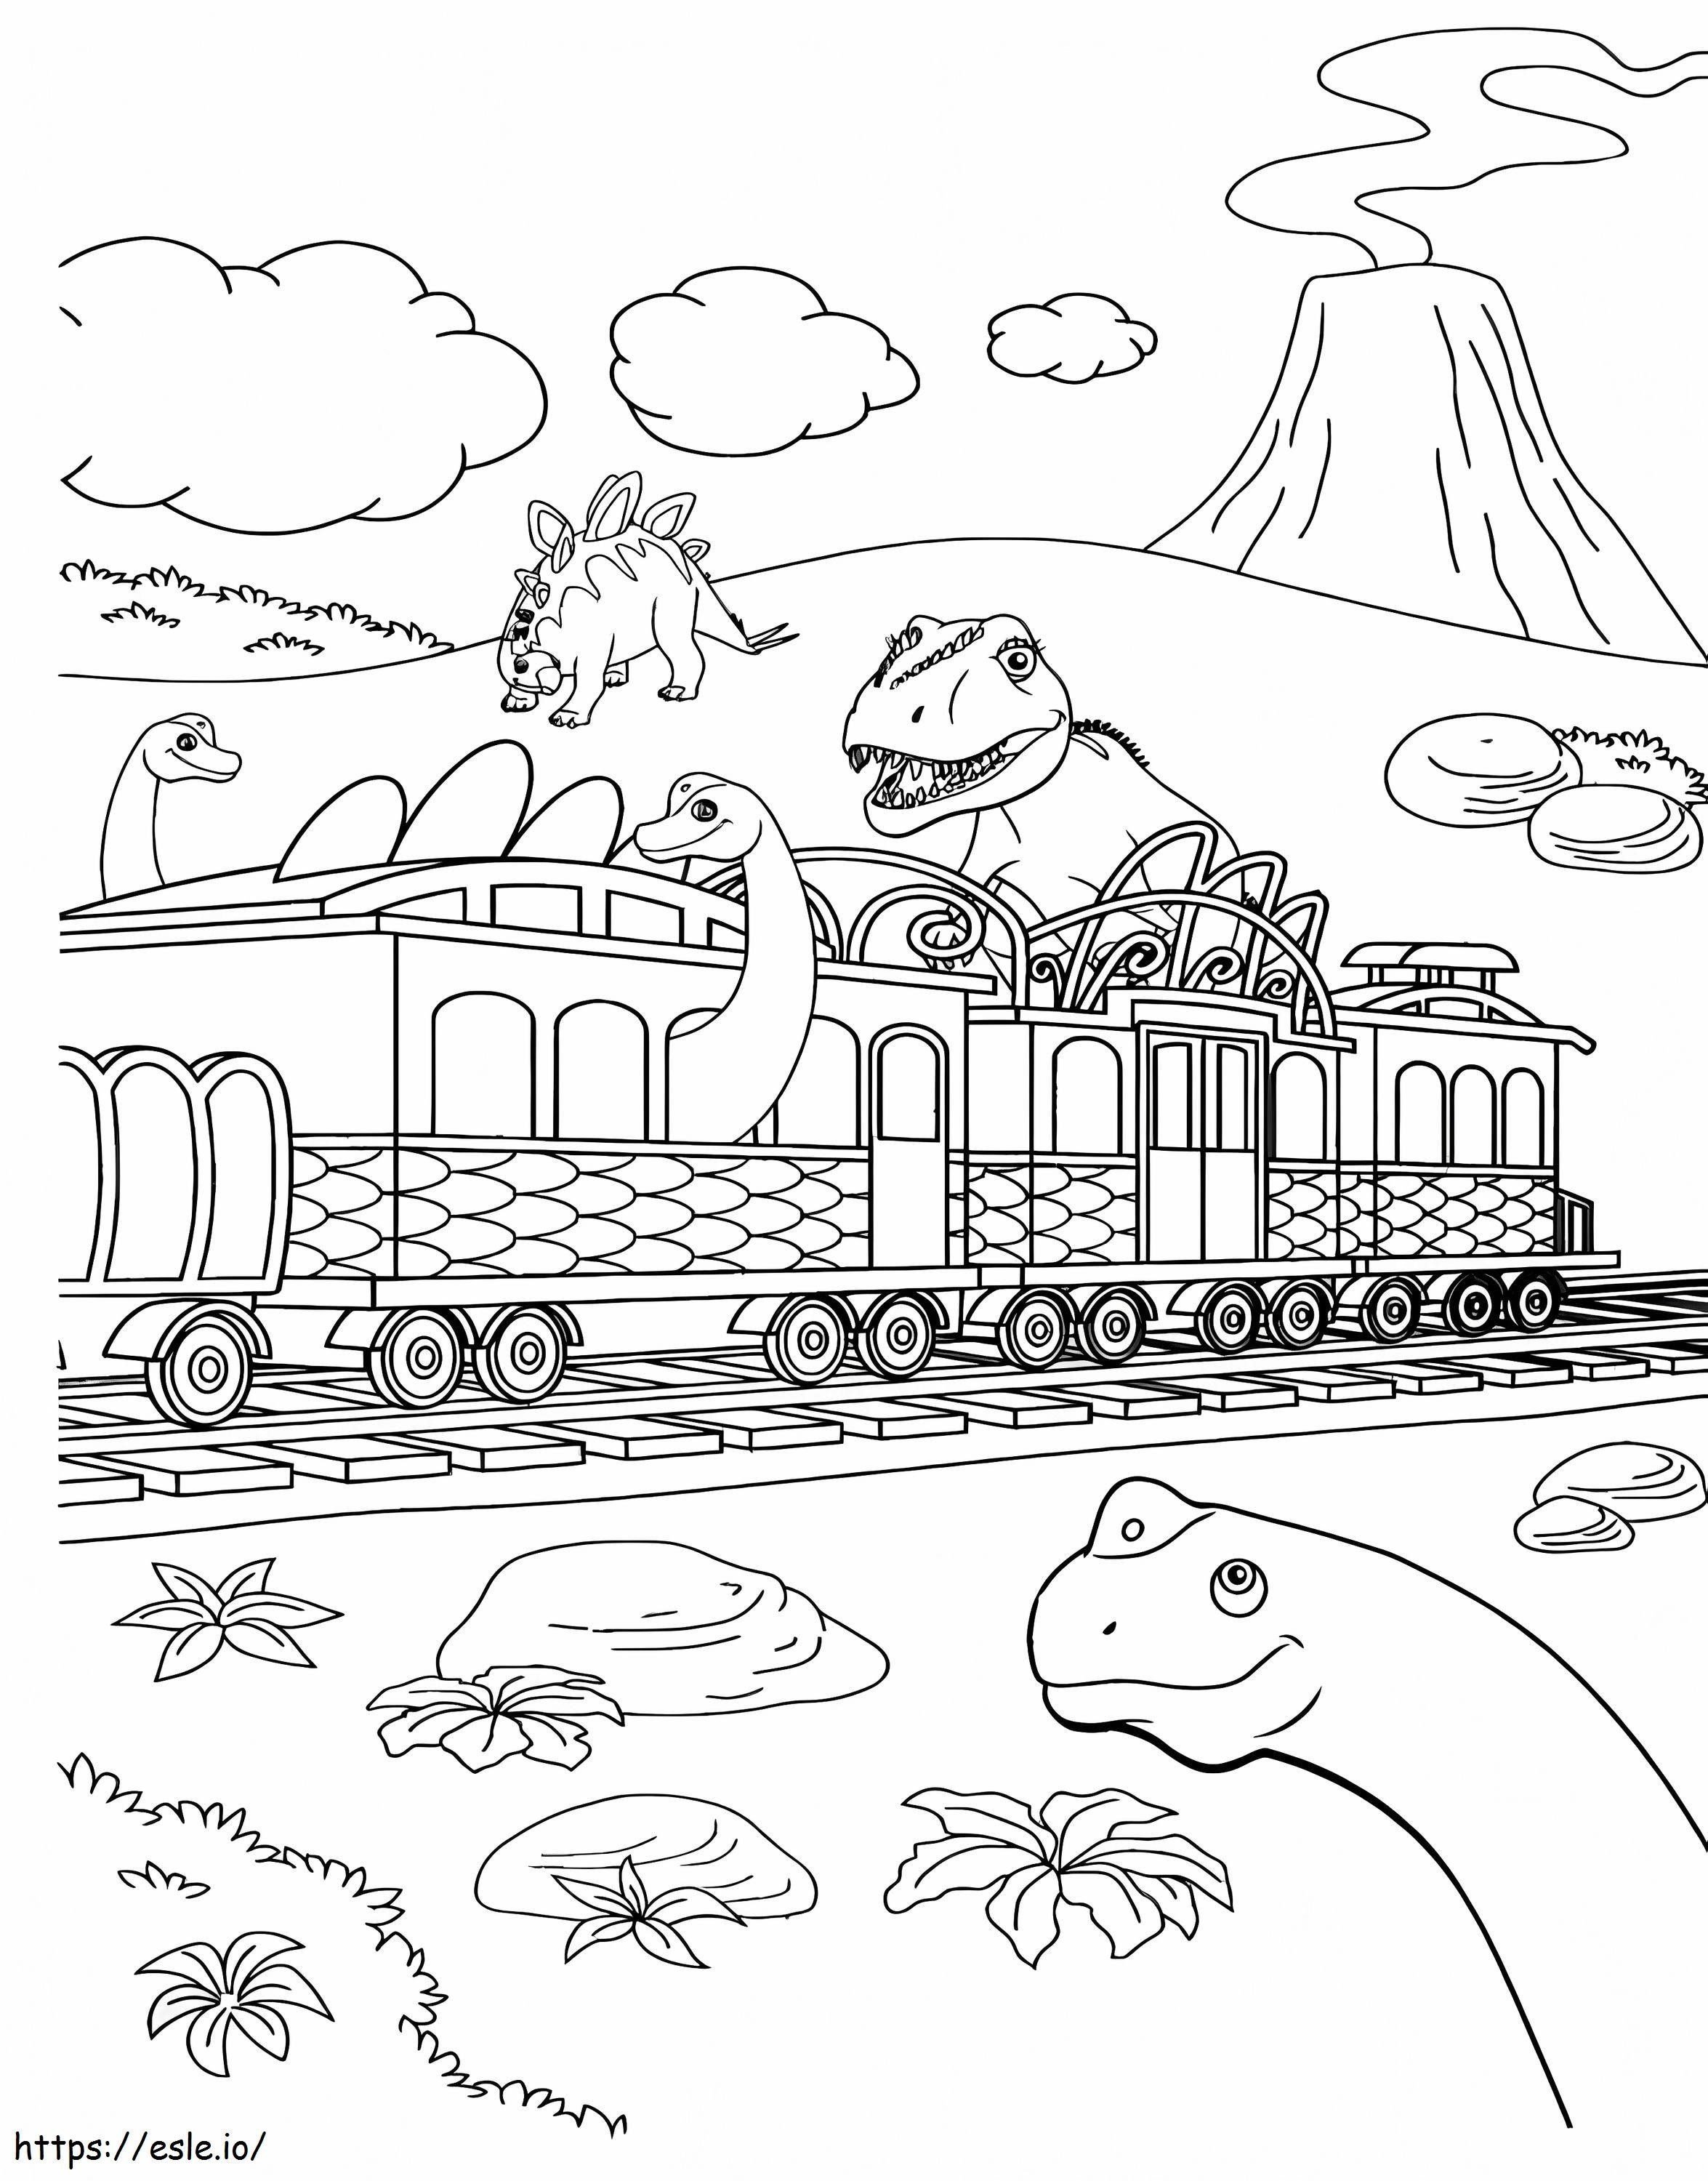 Dinosaur And Jurassic Boat coloring page